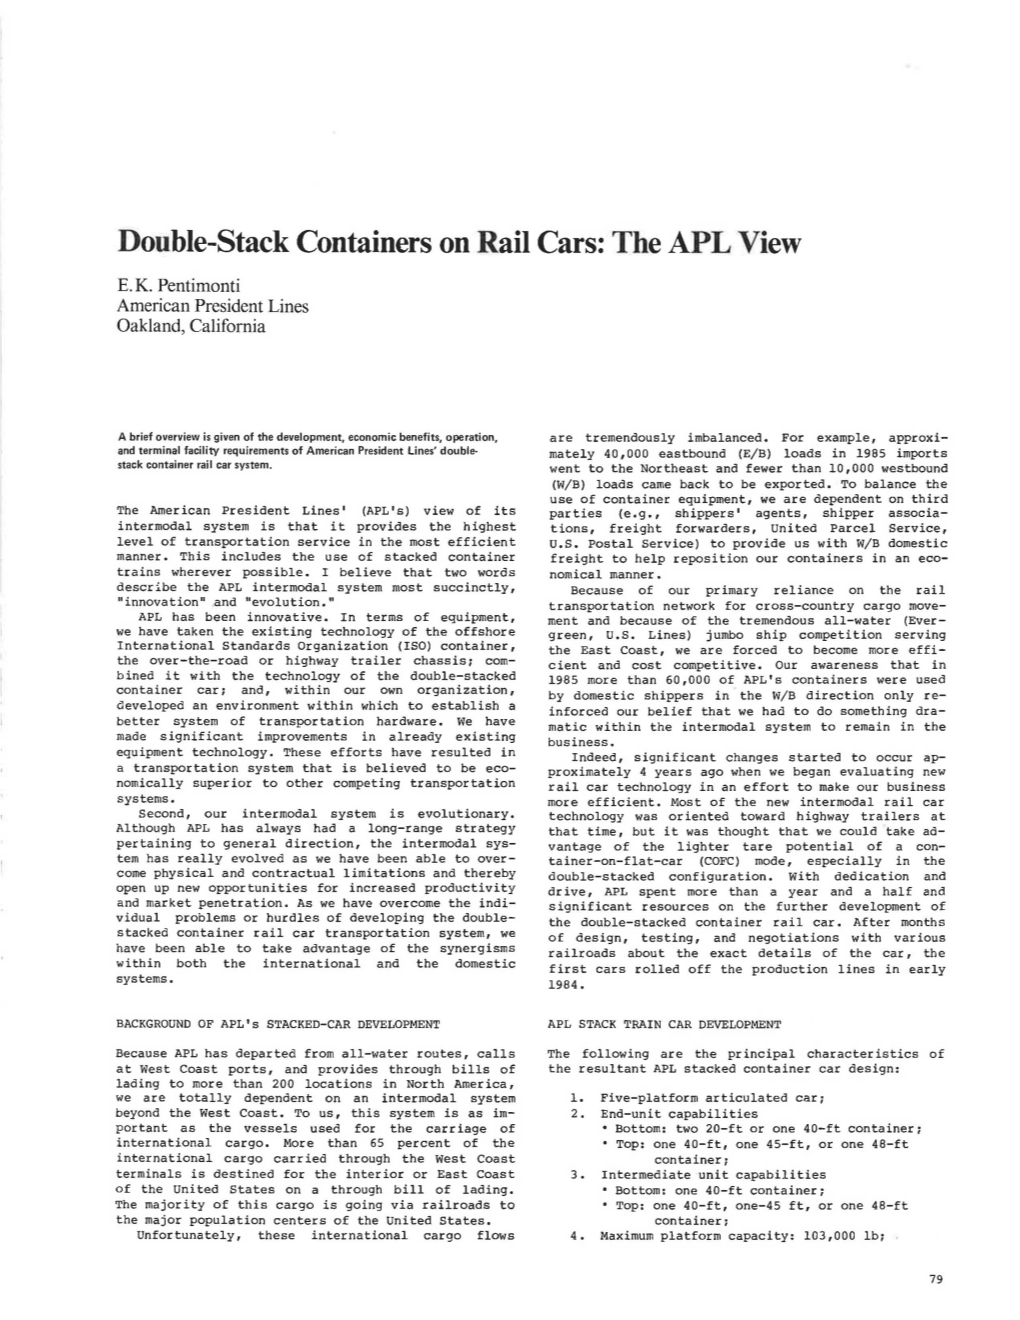 Double-Stack Containers on Rail Cars: the APL View